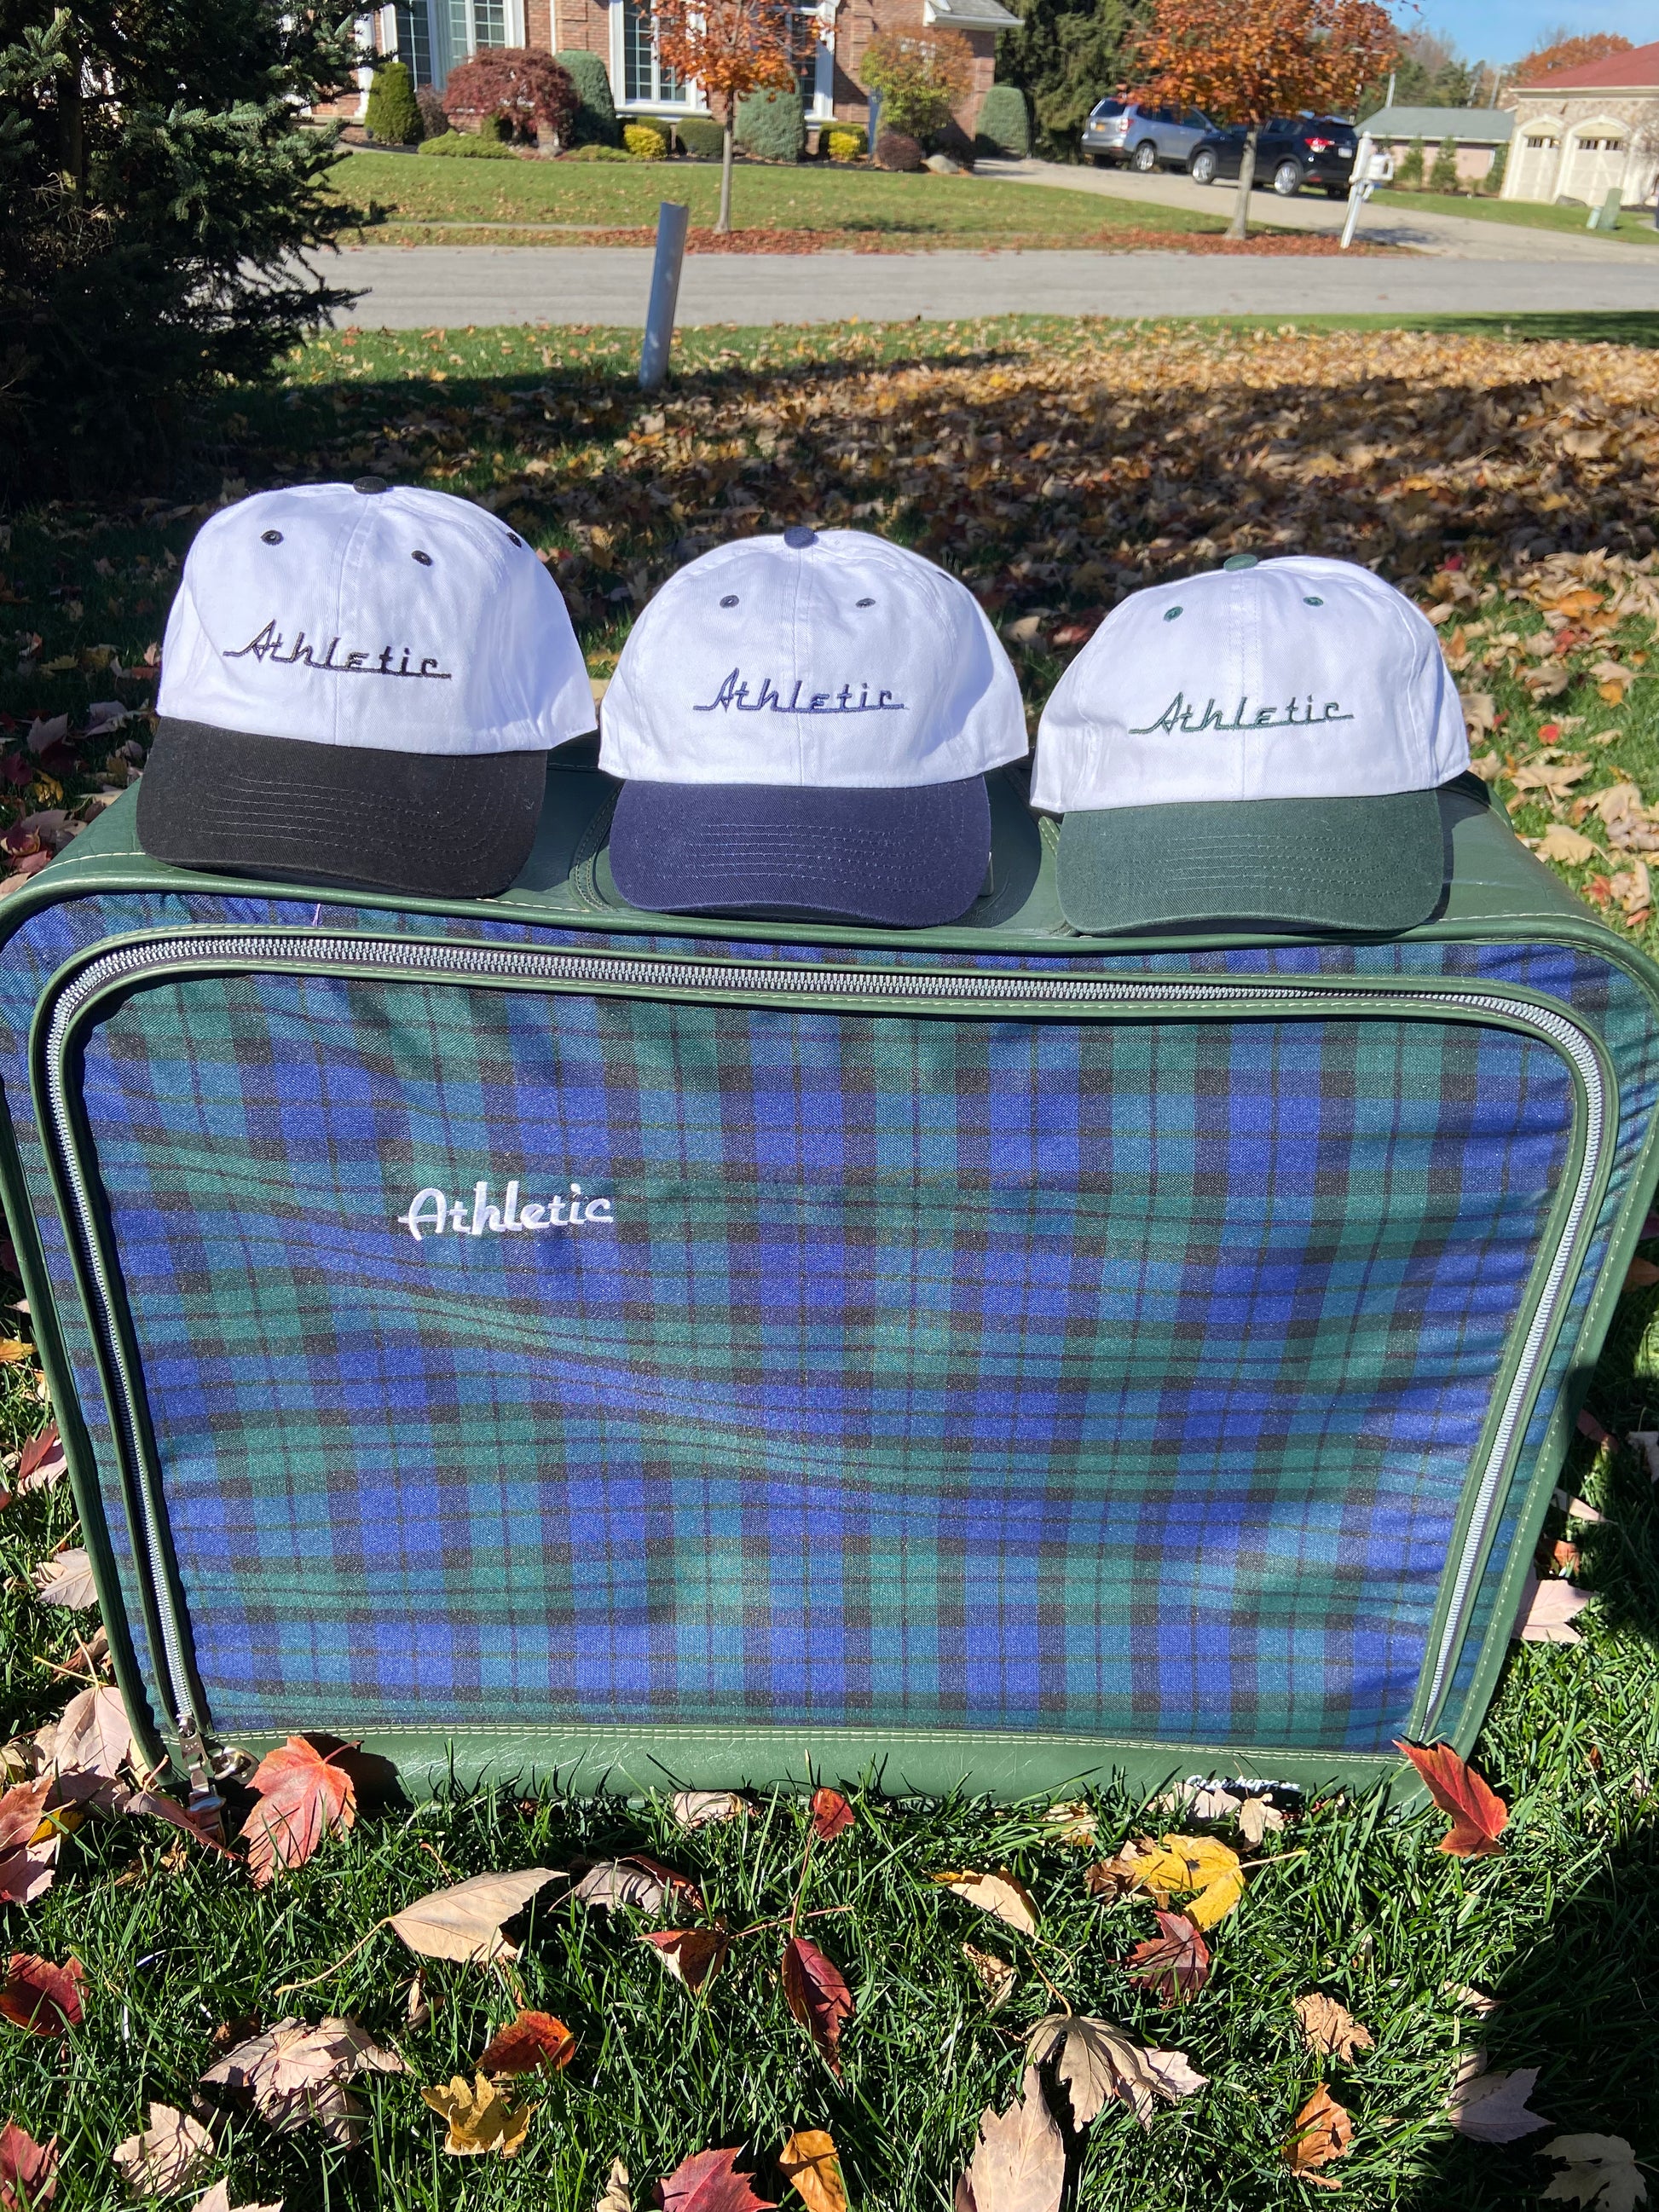 Vintage style white hat with a green brim. Athletic and Affluent calls this colorway "Gas It Green" and the AA club showcases their racing logo in gas it green font as well, reading "Athletic". It sits atop vintage plaid luggage between AA Clubs Racer Hats in "neutral navy" and "tire track black"